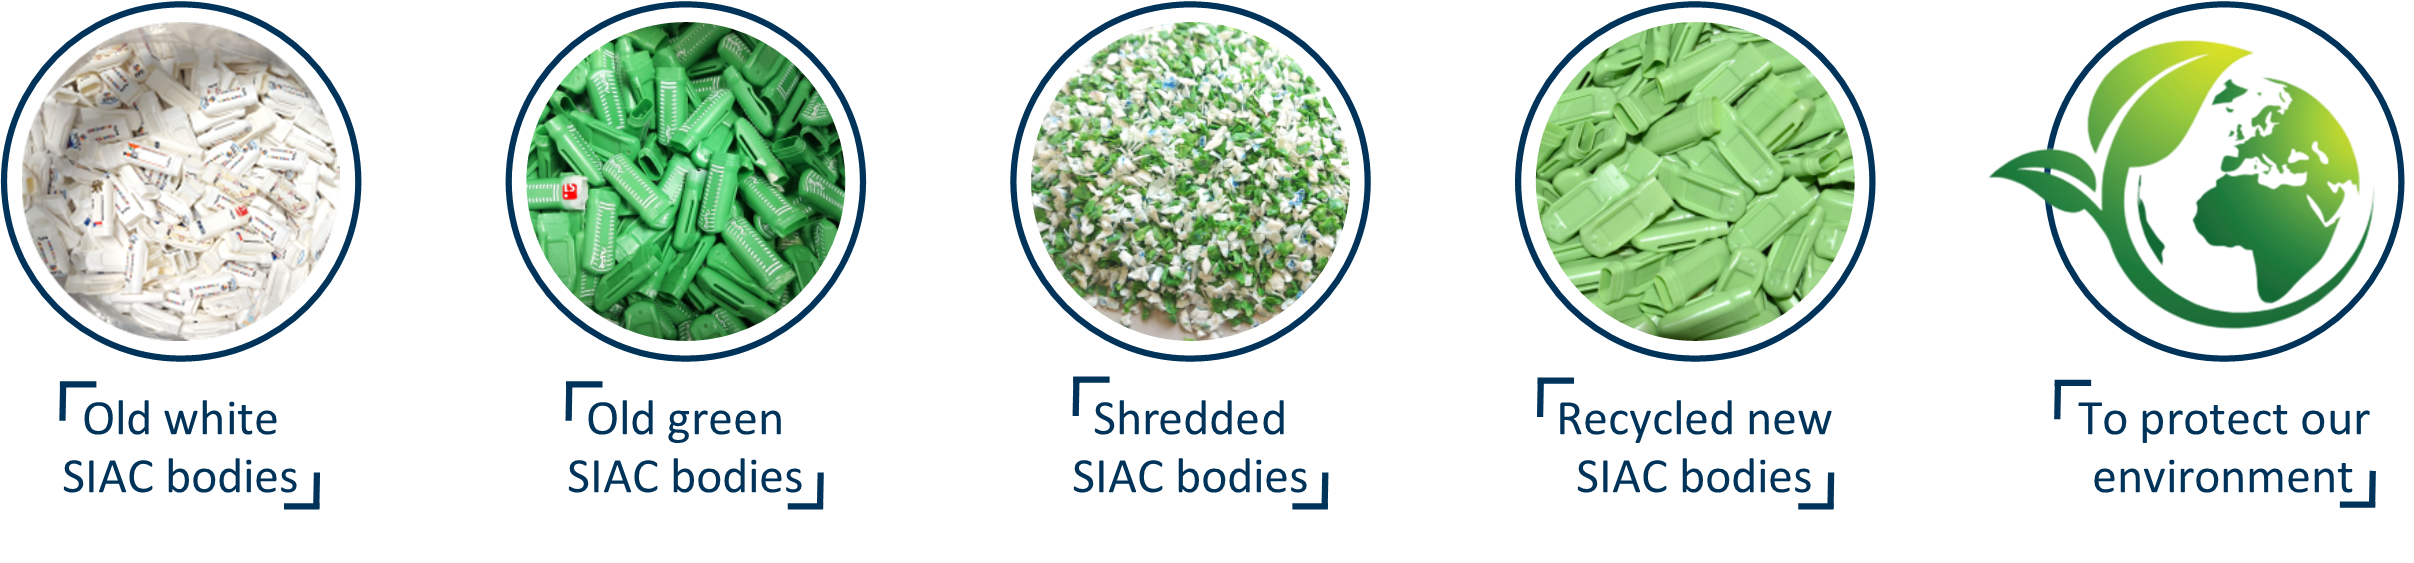 The 1st SIAC with a 100% recycled body